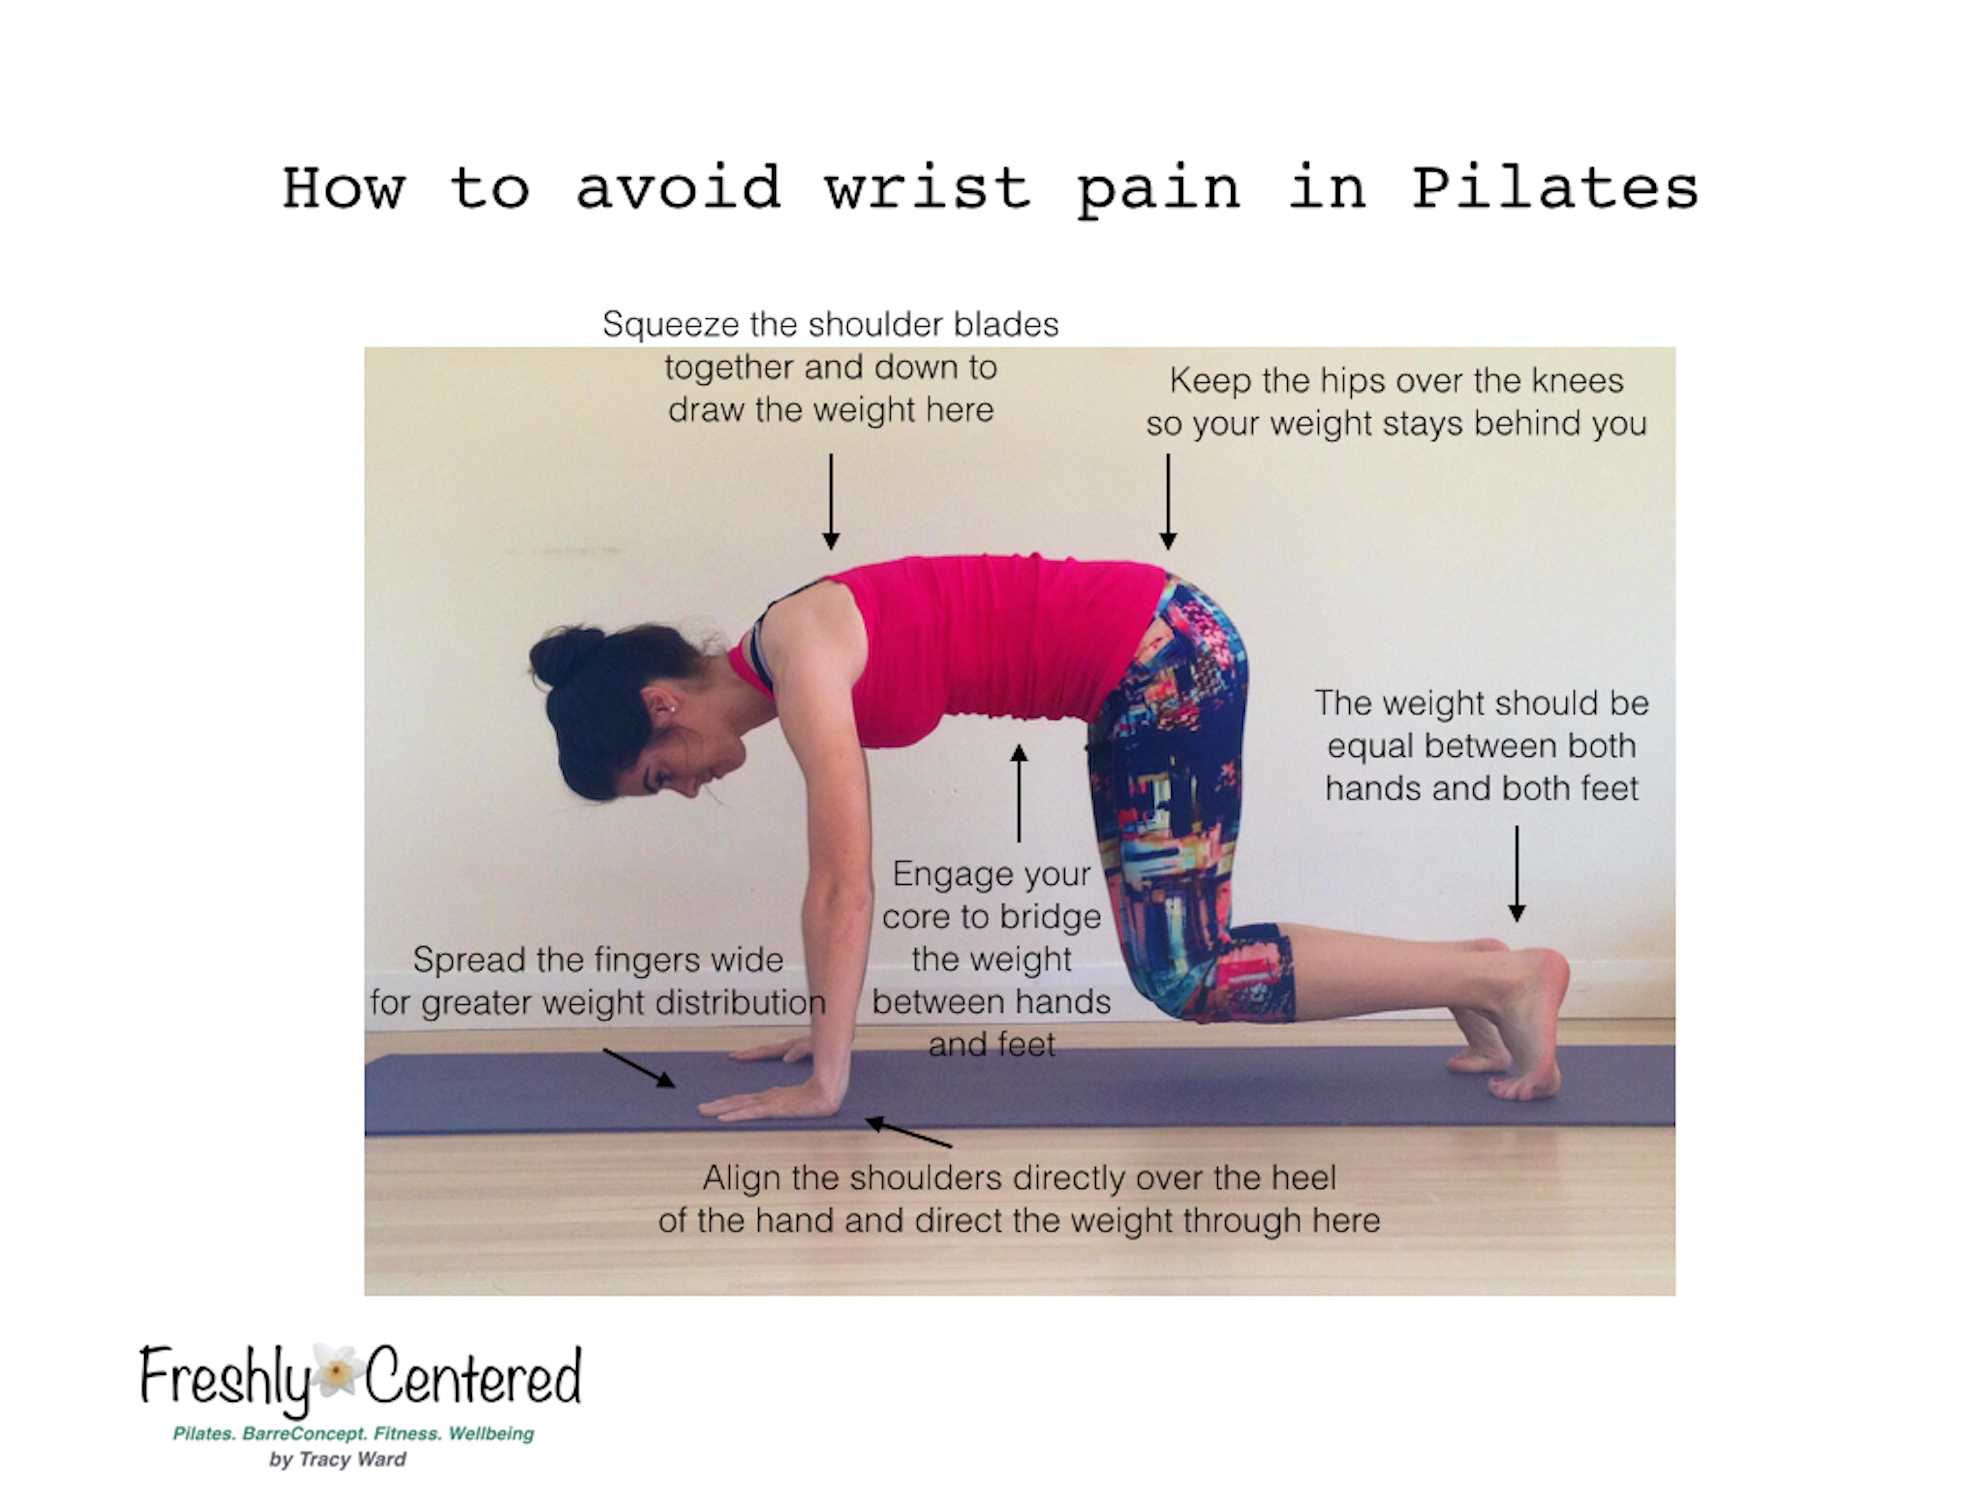 Does Your Wrist Hurt During Yoga? Here's How to Deal - FabFitFun